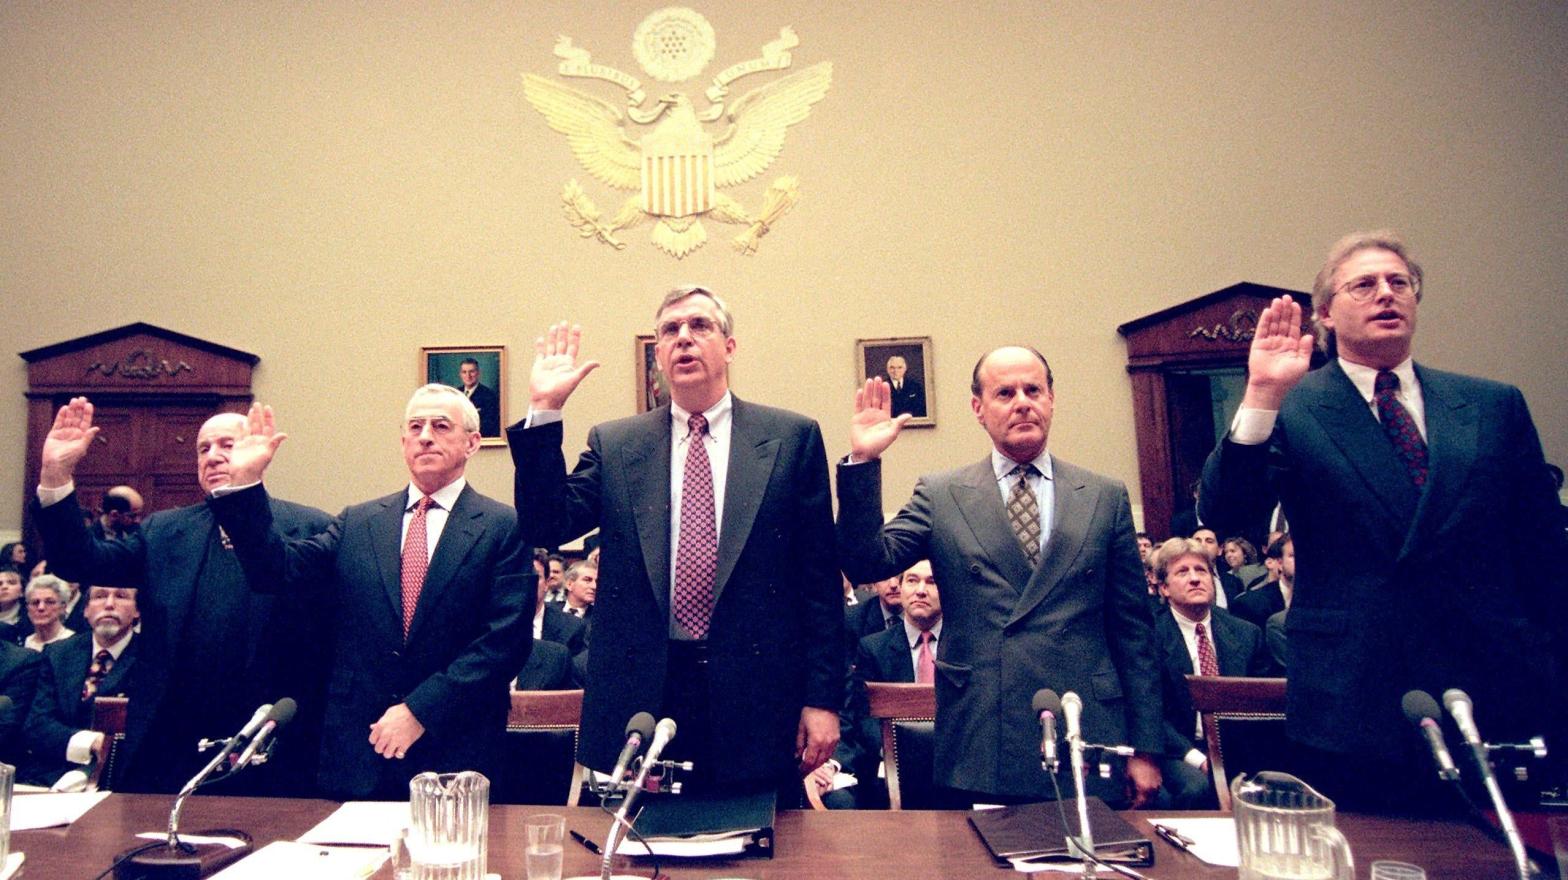 Five tobacco industry executives are sworn in before testifying in front of the US House Commerce Committee on Capitol Hill in Washington, DC. on January 29, 1998. (Photo: Jessica Perrson/AFP, Getty Images)